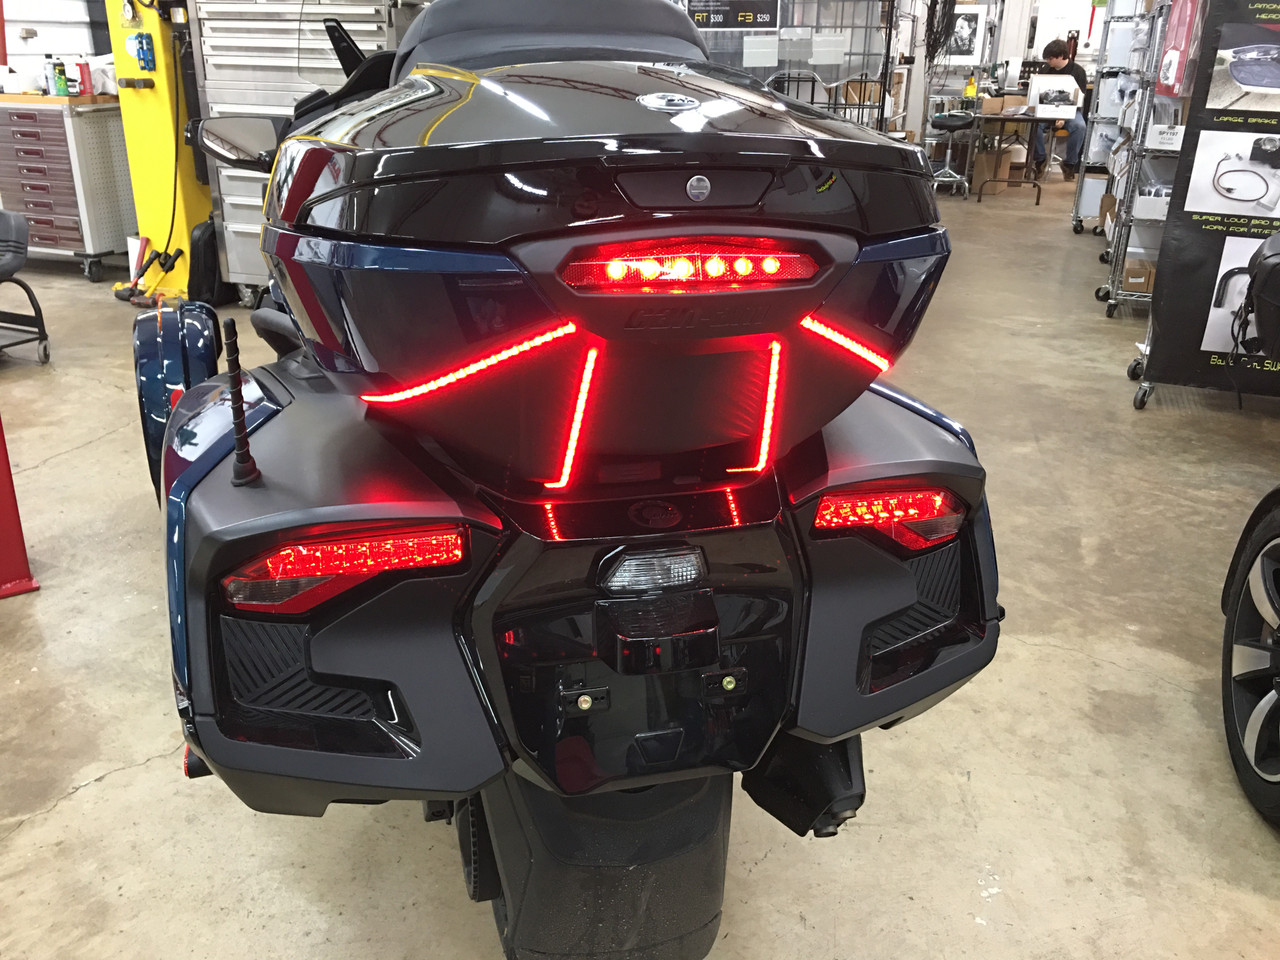 The "Braker Bars" Brake/Run Light with Strobe Feature LED Kit (All Models with Top Case)